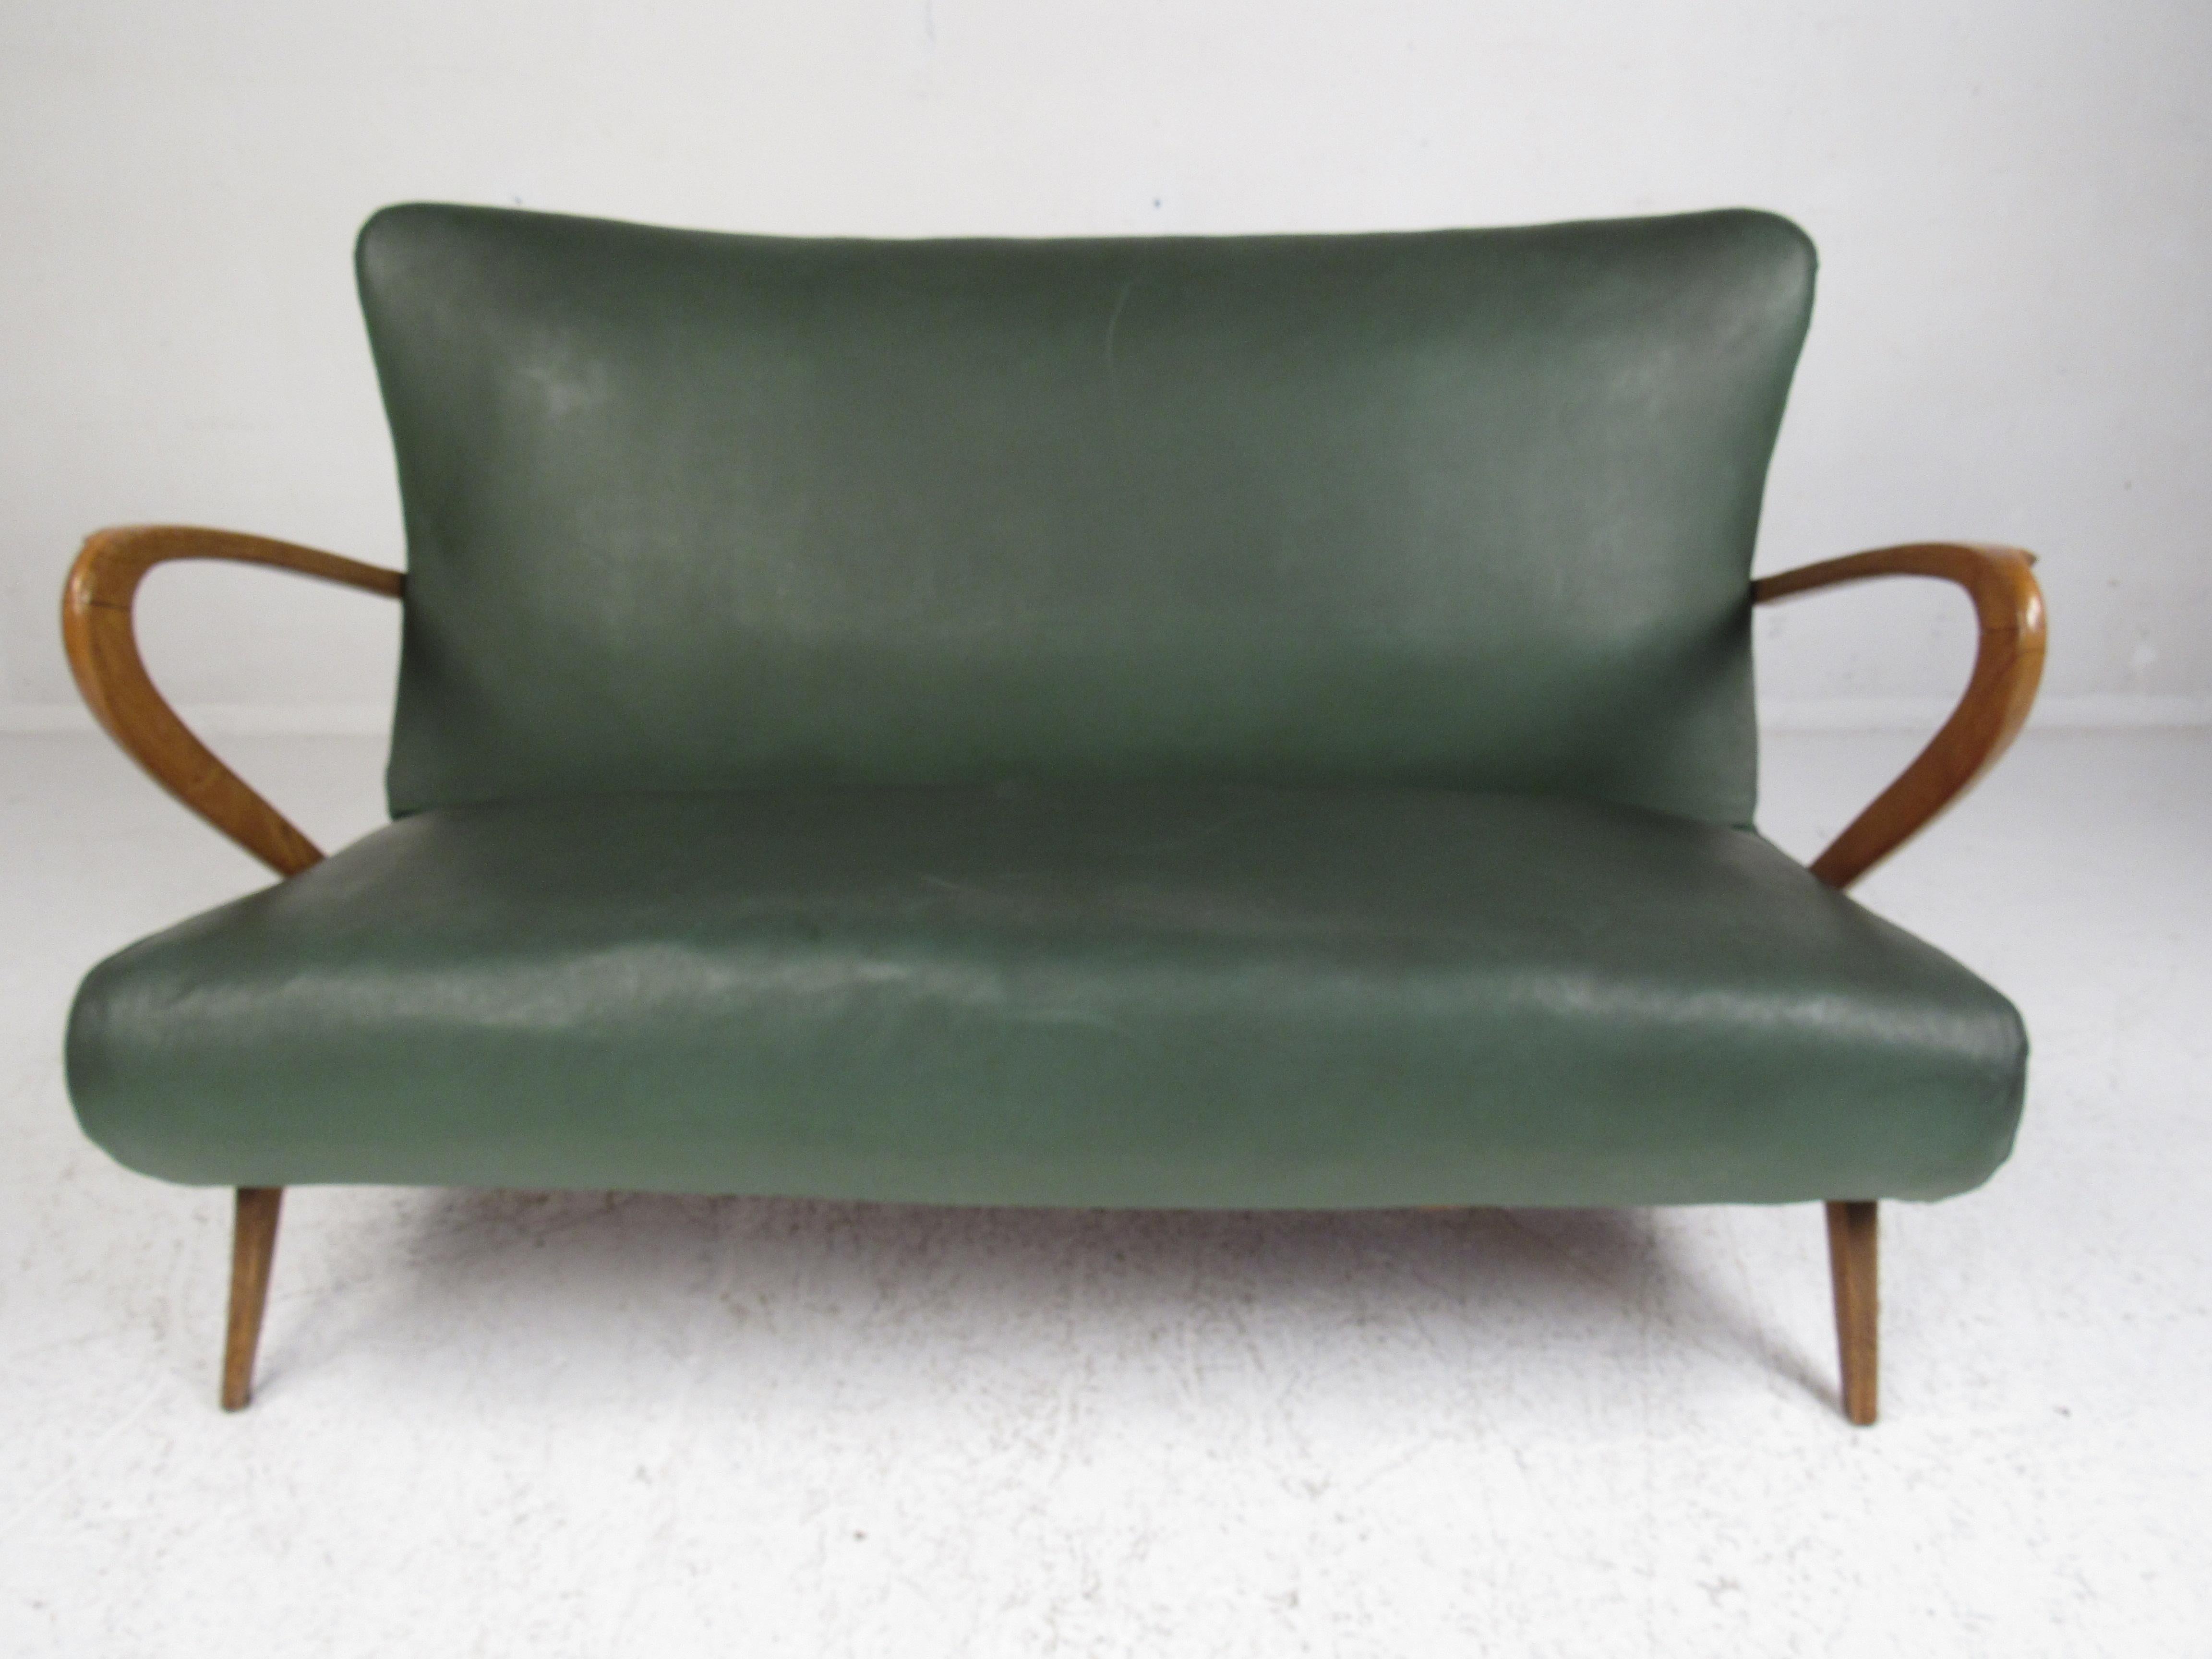 This stunning vintage modern sofa boasts a sculpted oak frame with curved armrests and angled legs. A sleek and comfortable design covered in green vinyl. This wonderful Paolo Buffa style settee is sure to fit any seating arrangement. Please confirm